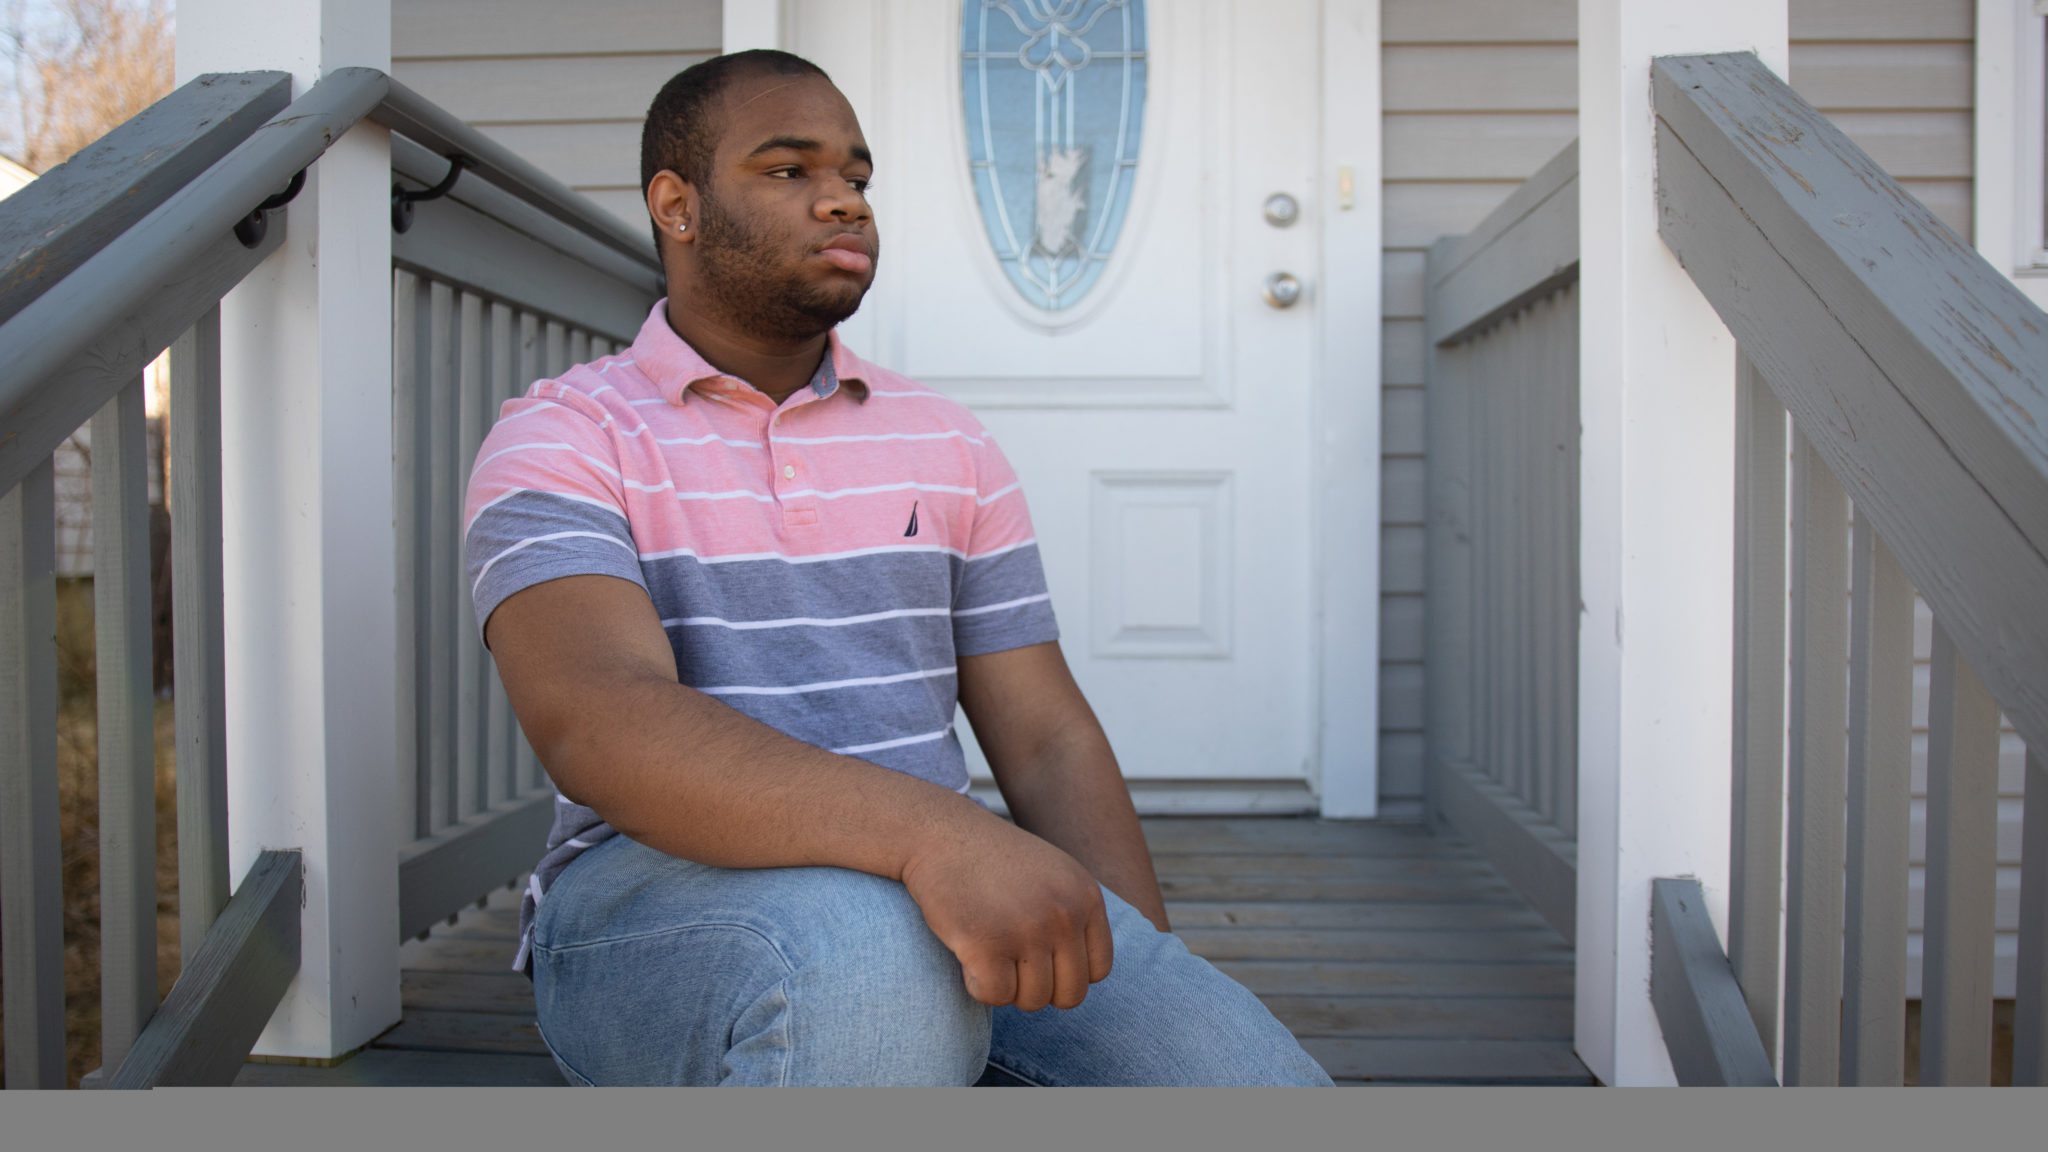 Dark skinned man sits on the steps of a house, staring into the distance